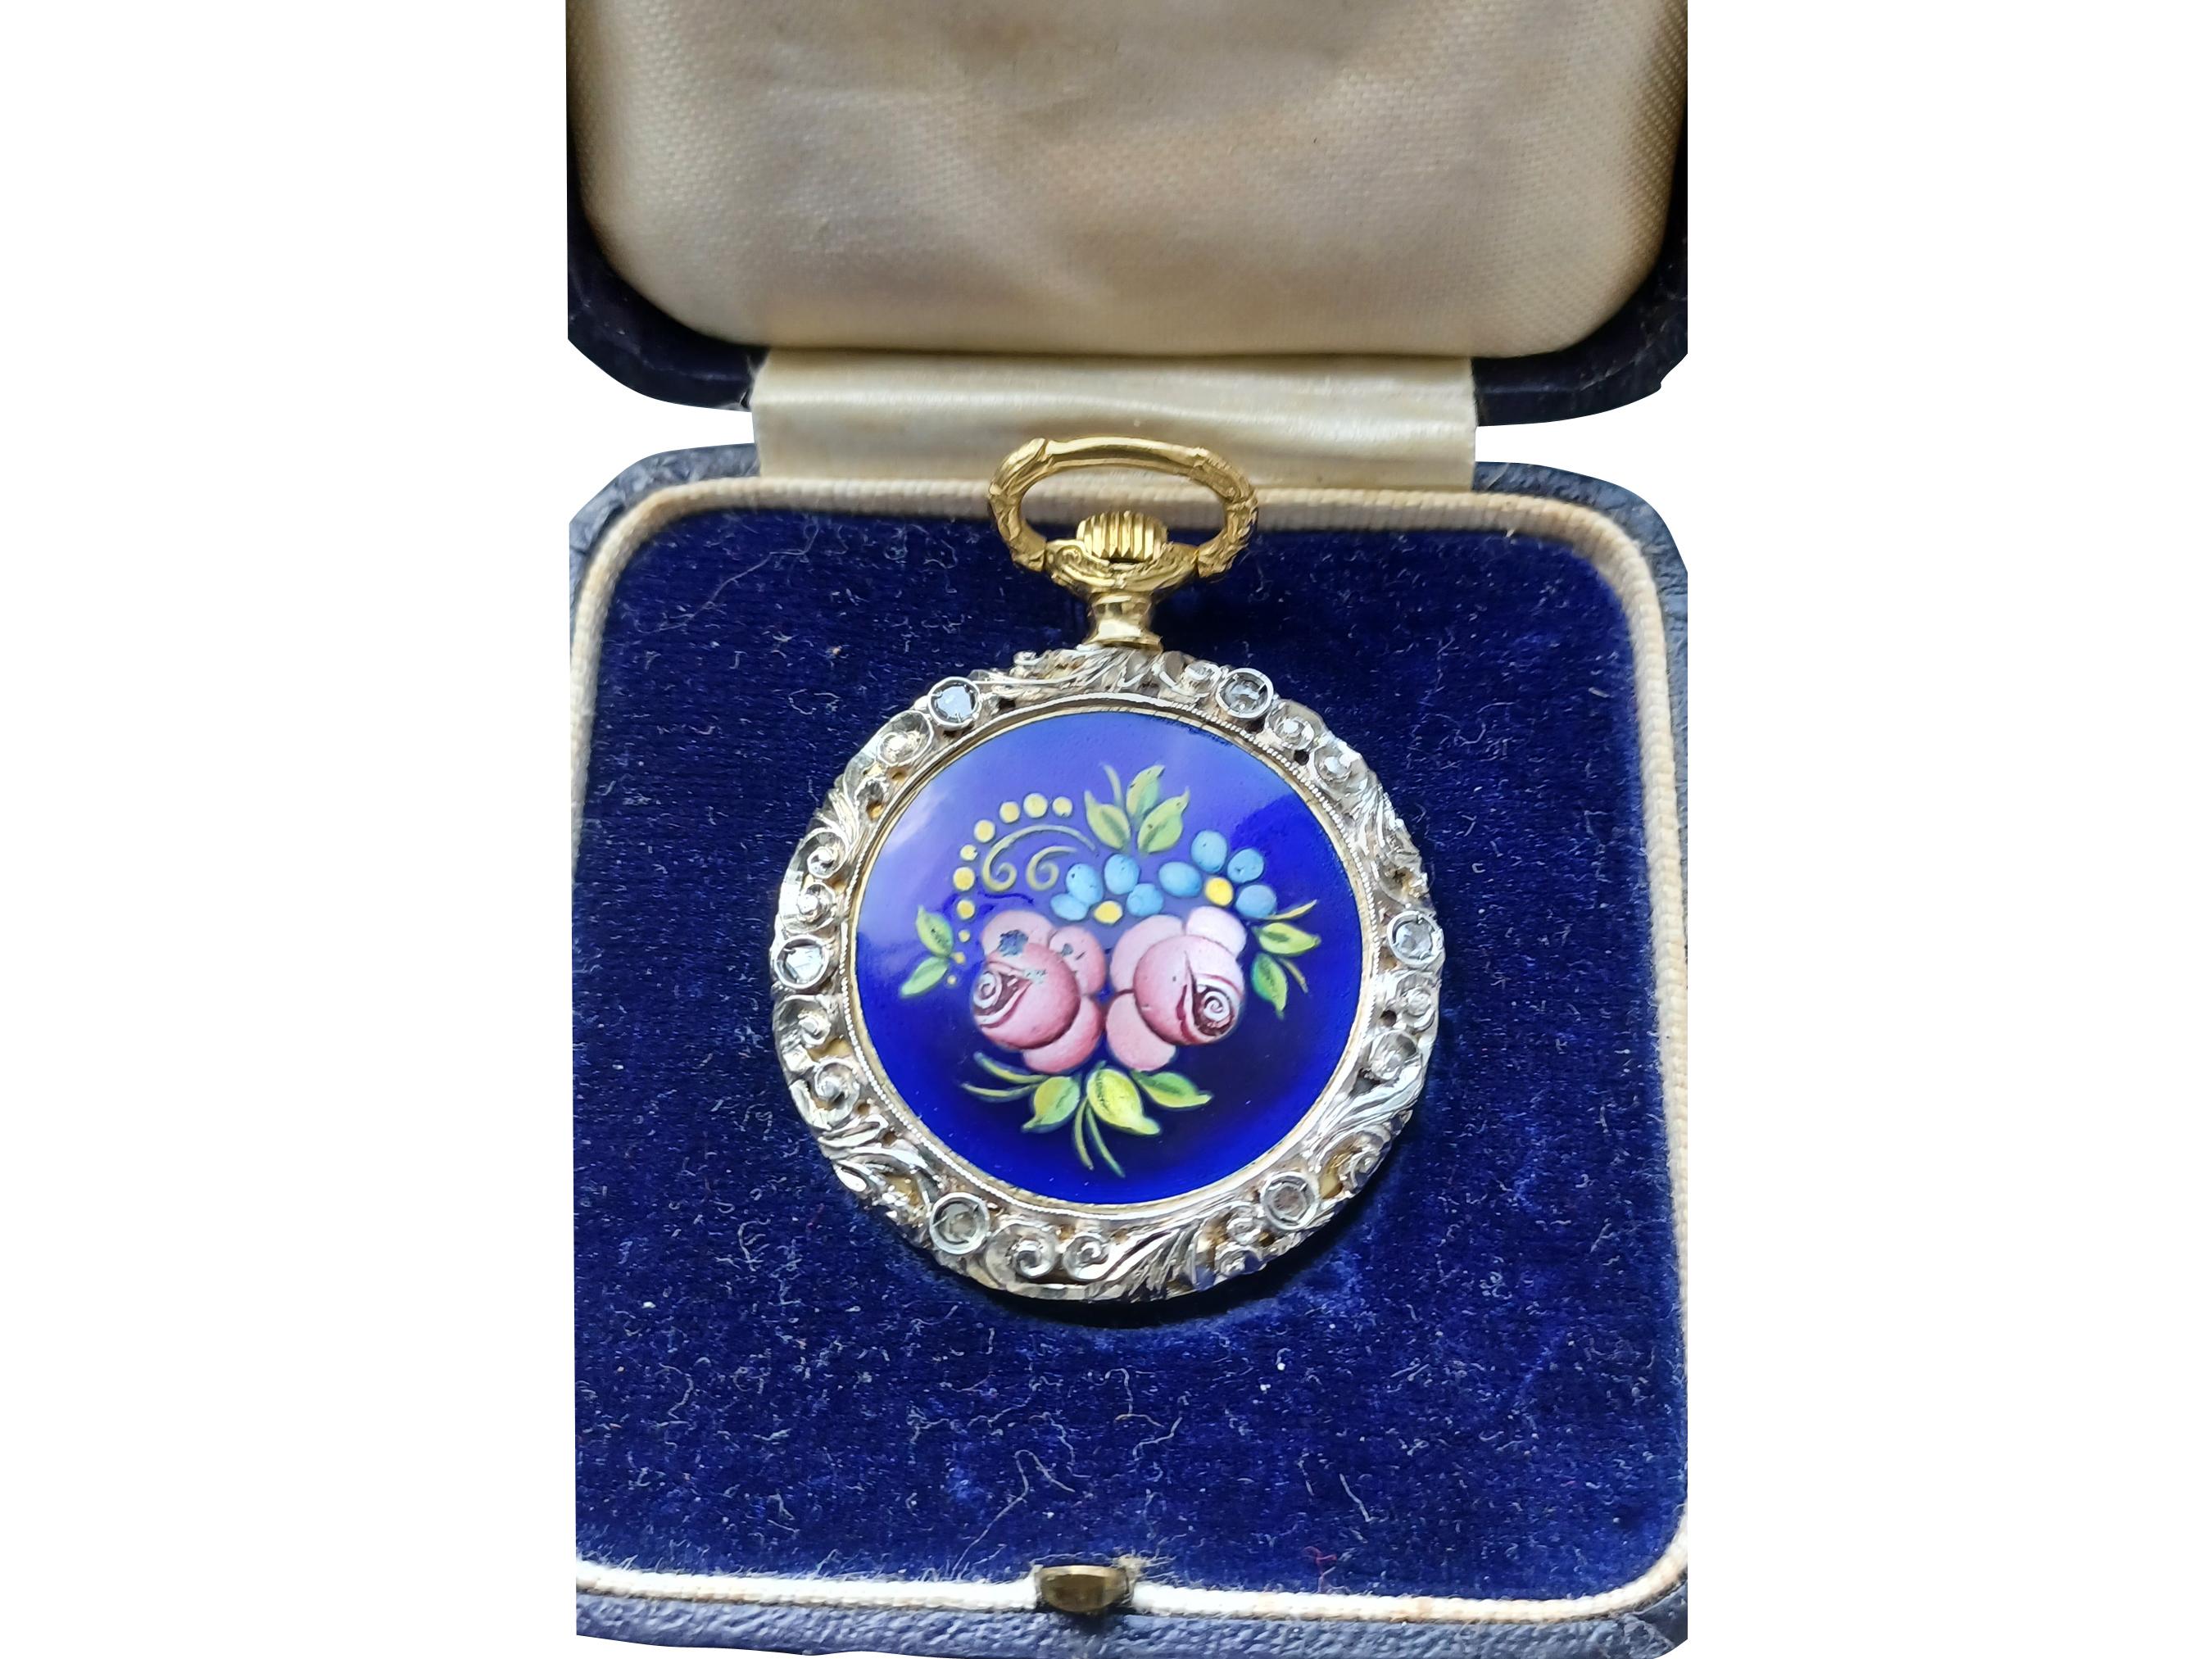 Rare 18ct Ruby and Diamond Pocket Watch with Elaborate Mountings and Jewels For Sale 8